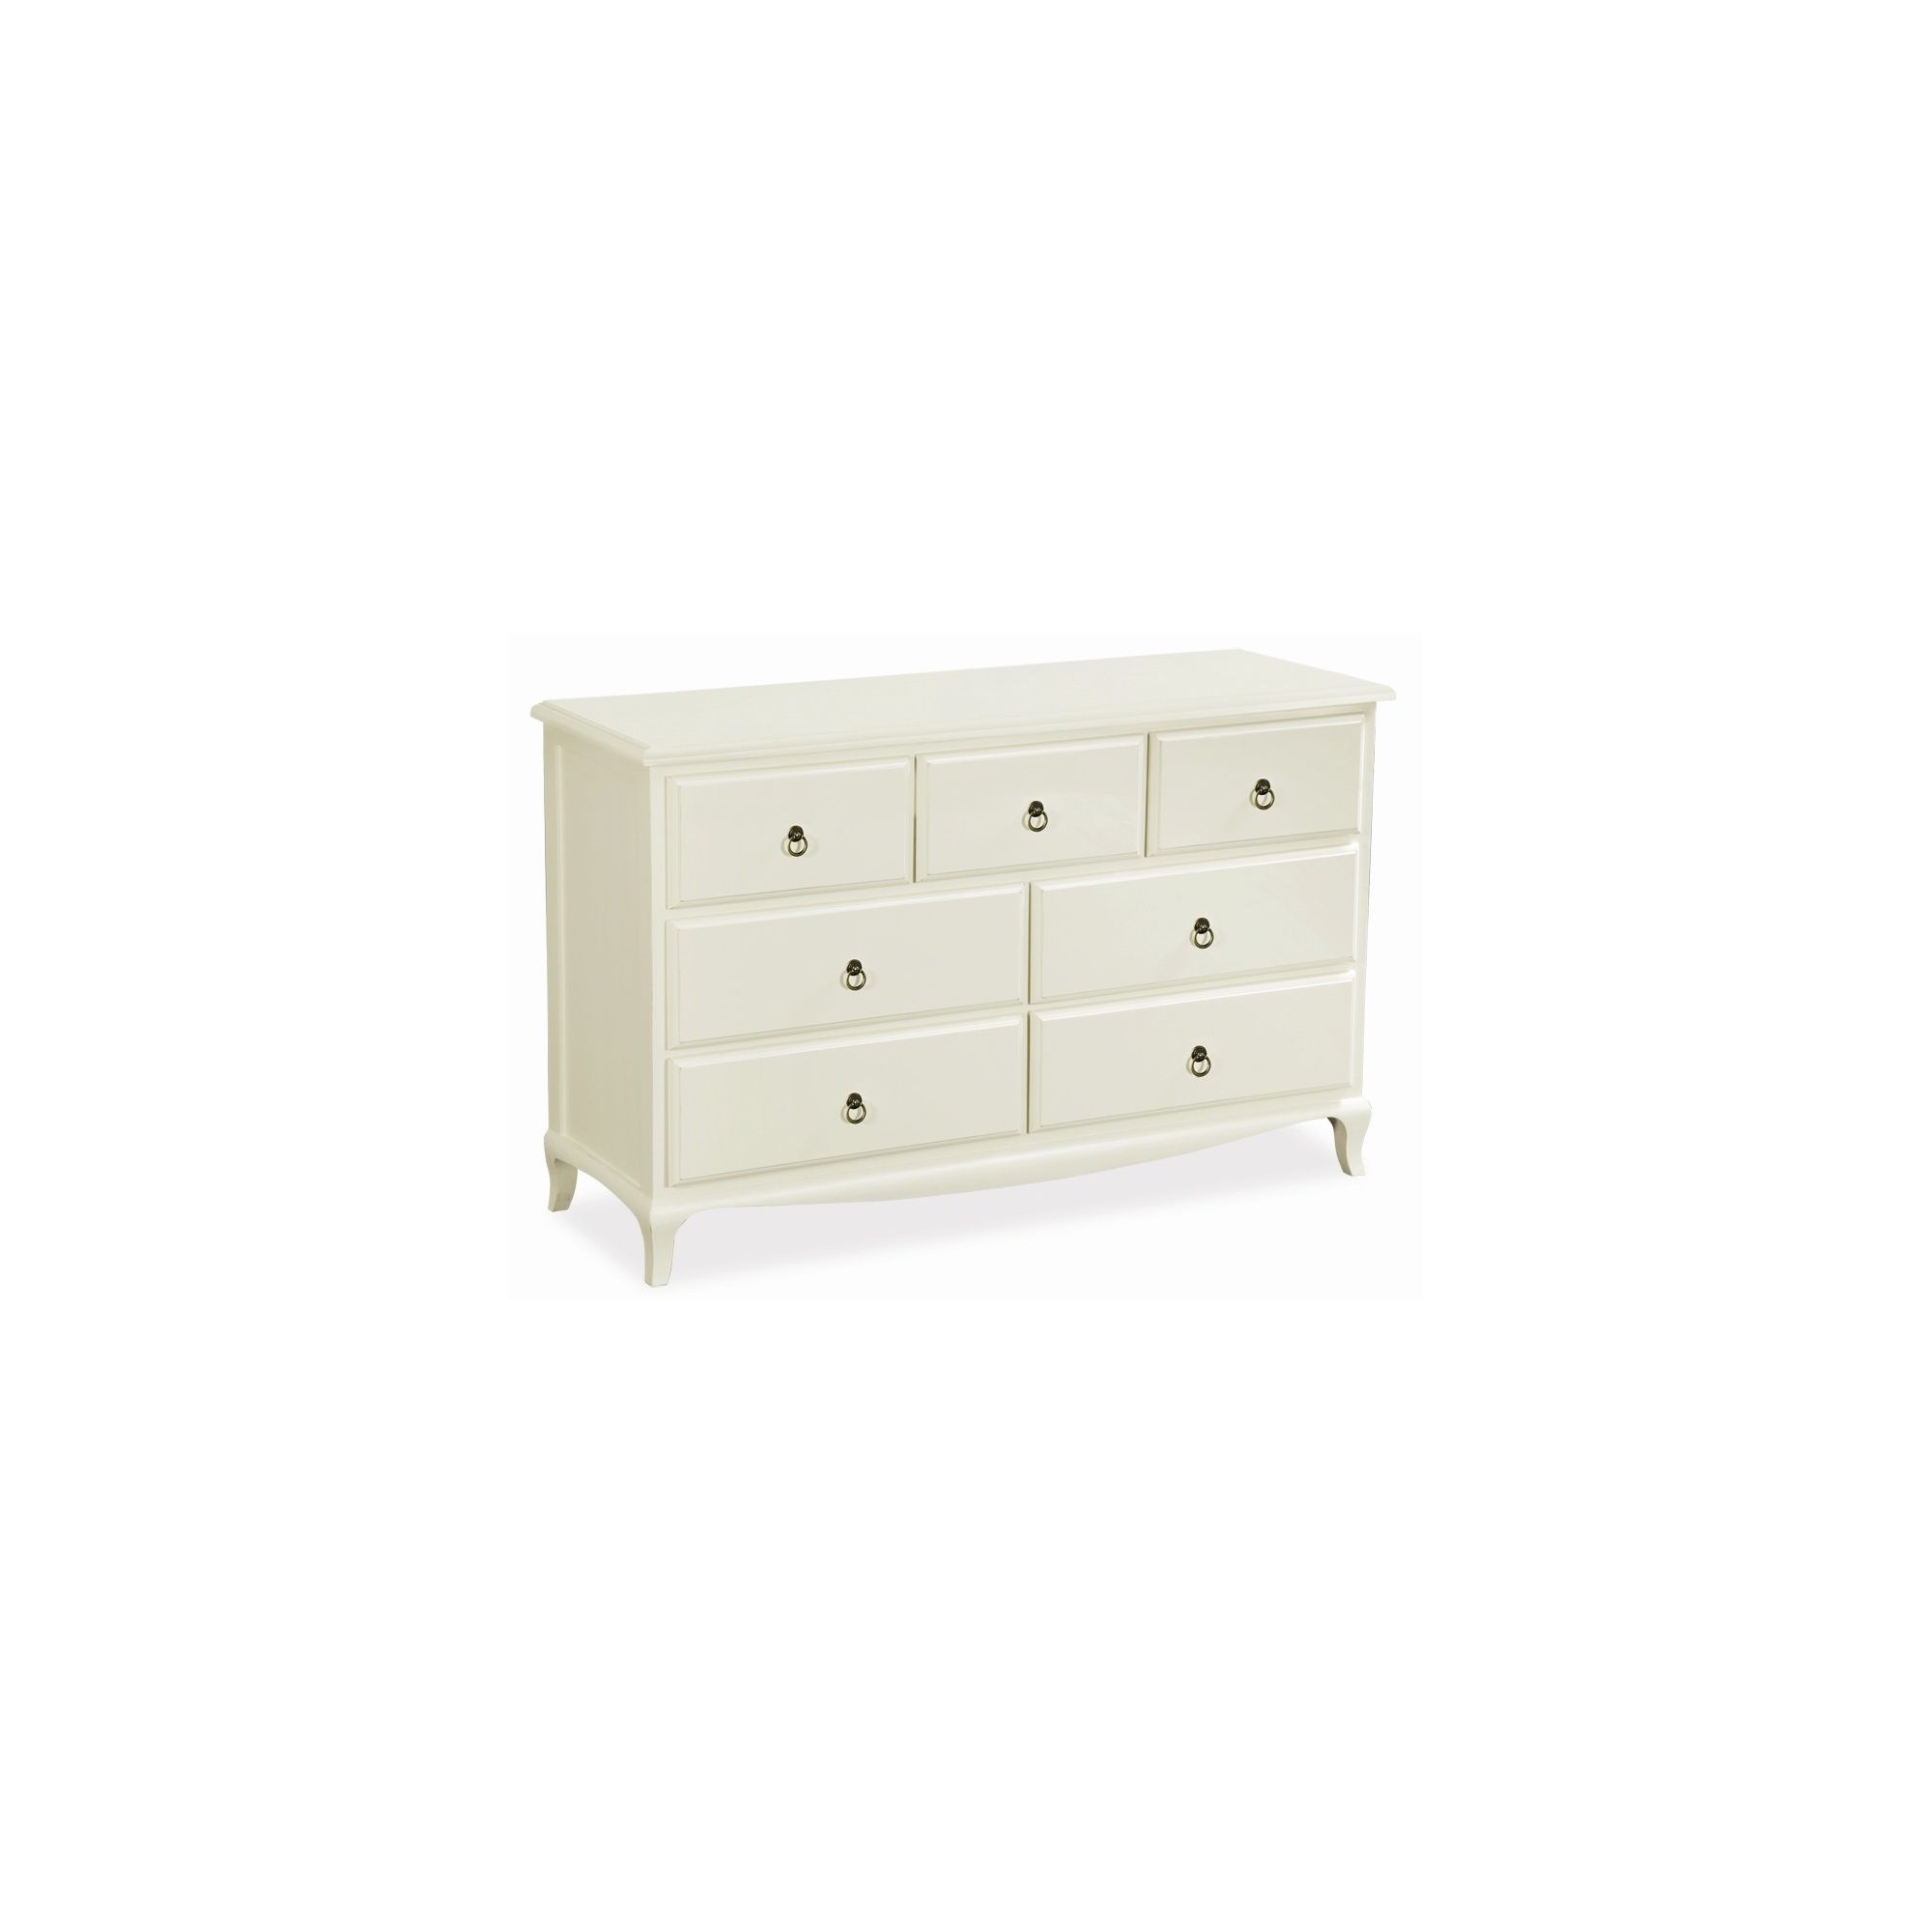 Alterton Furniture Normandy 4 Drawer Chest at Tesco Direct